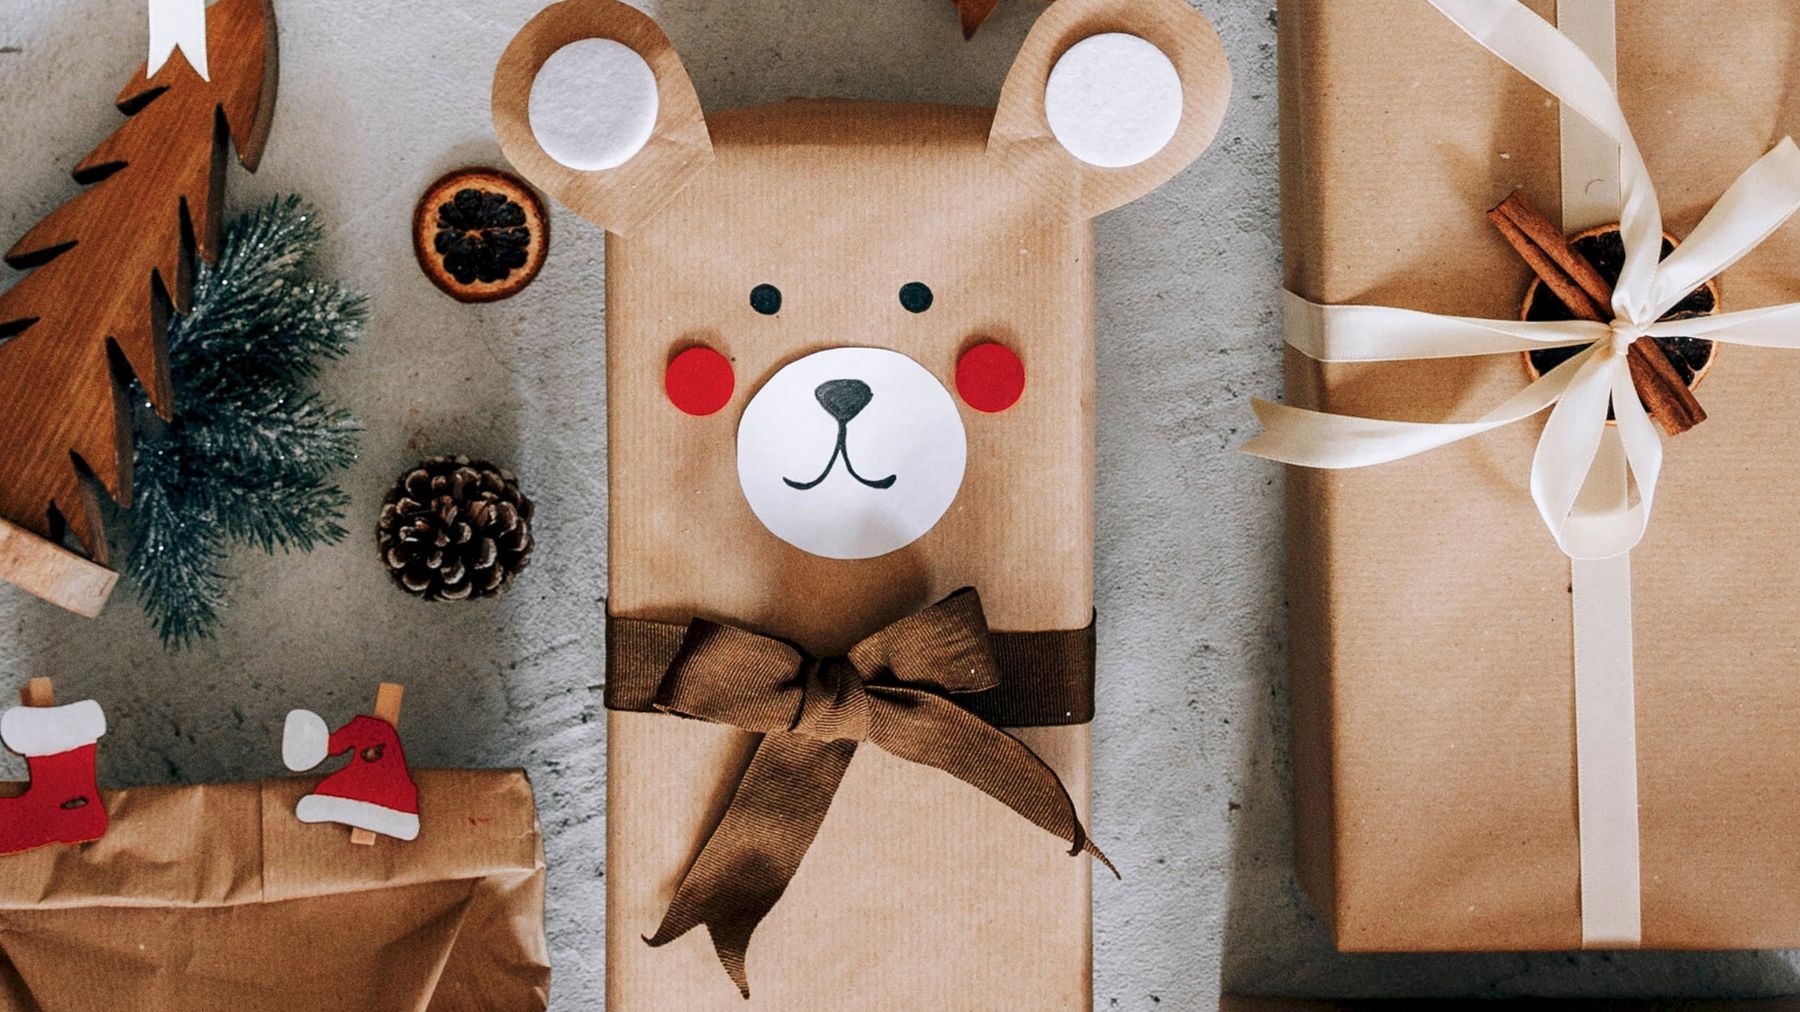 Christmas gifts: eco-friendly solutions for wrapping gifts